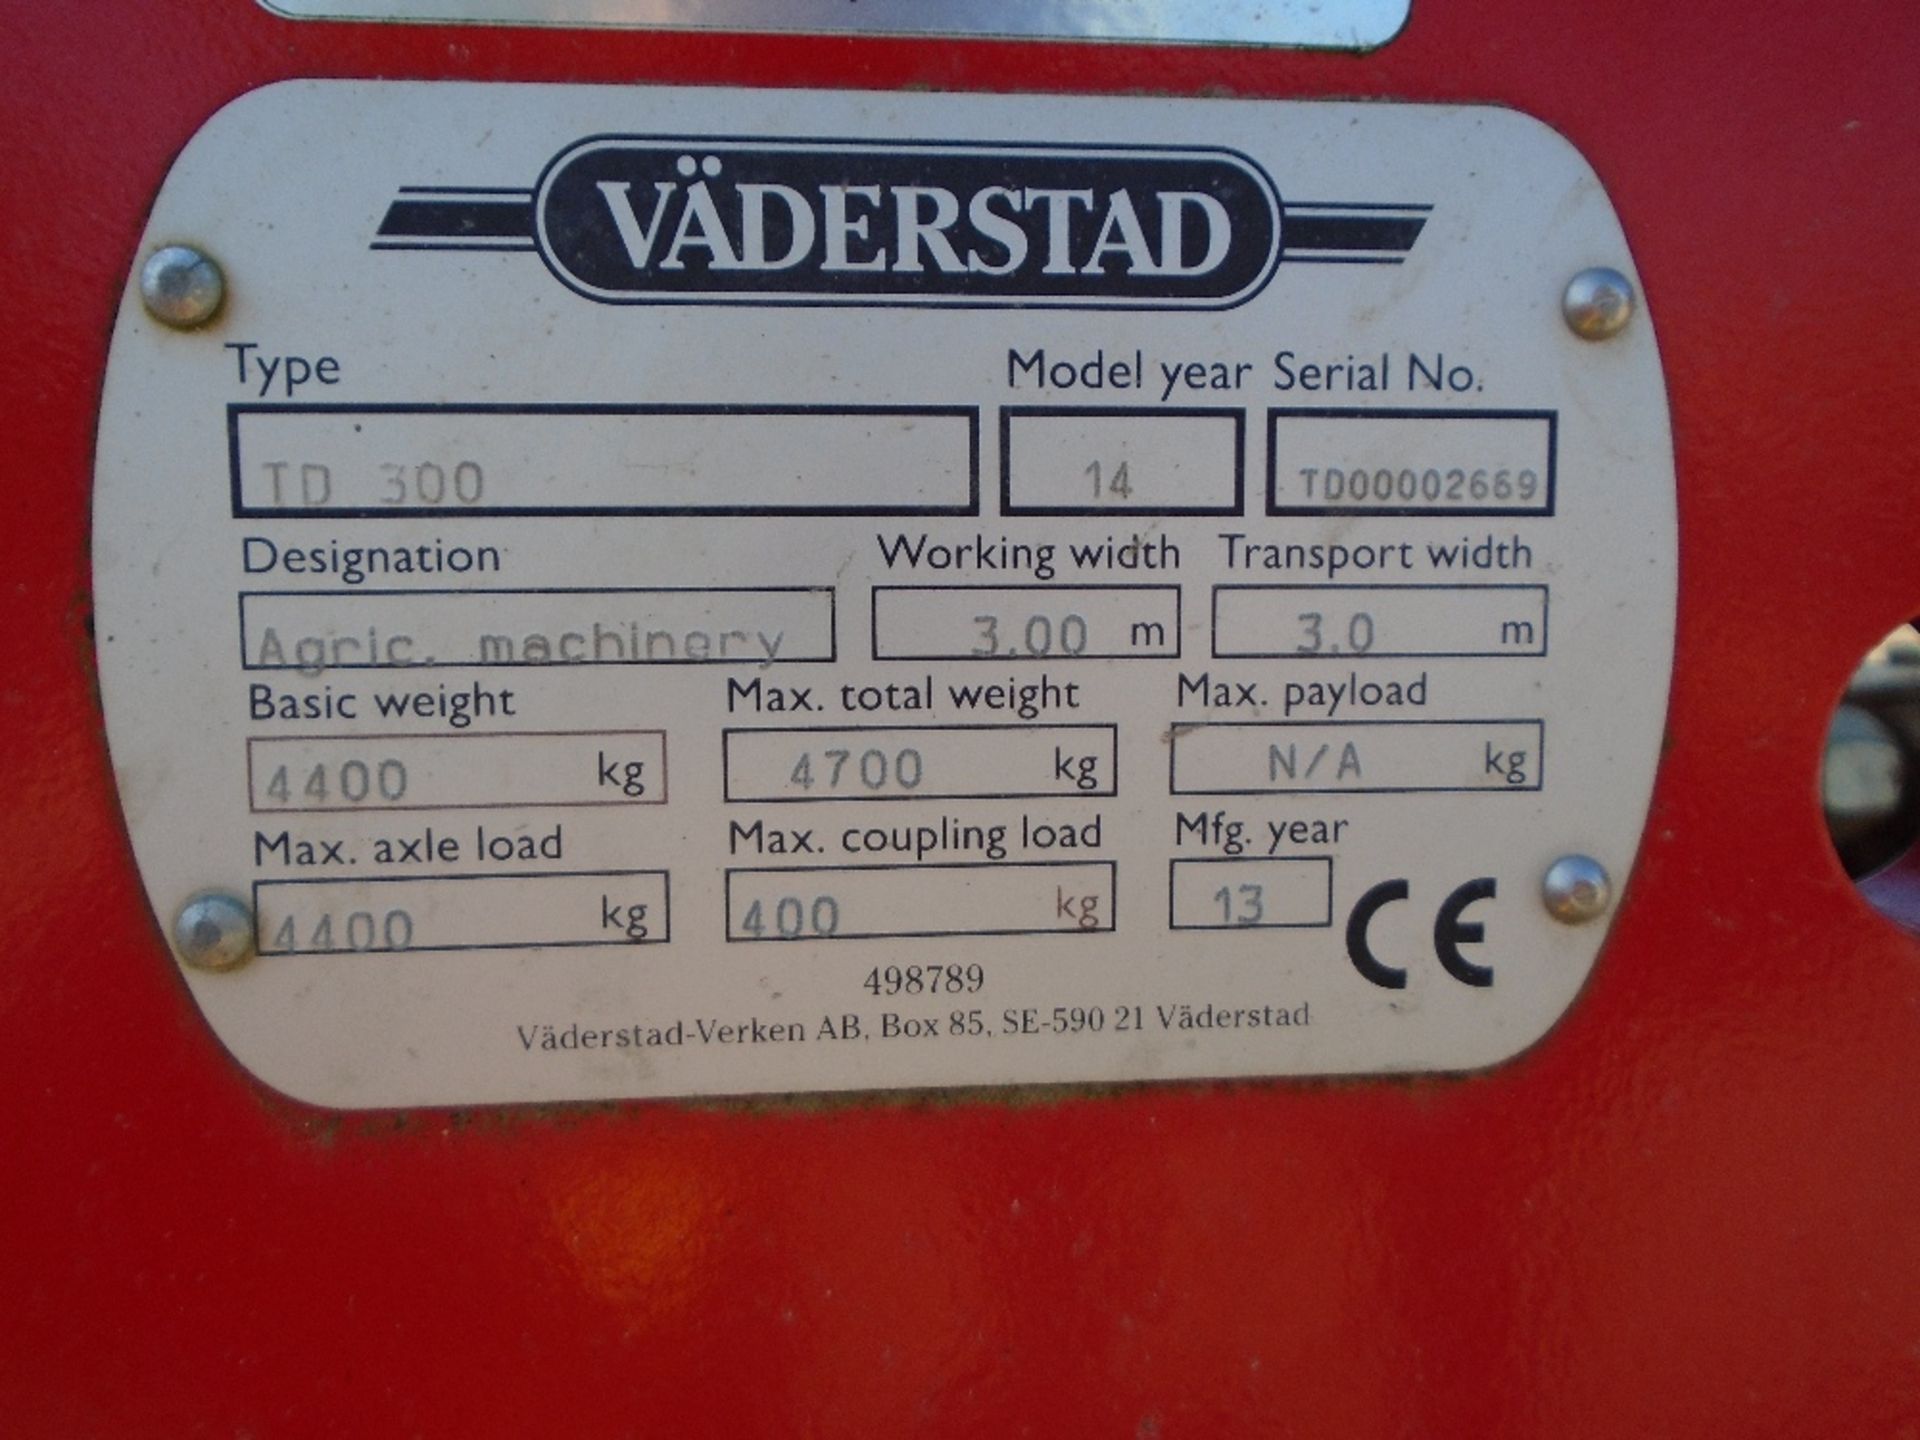 2014 VADERSTAD TOP DOWN 300 3M CULTIVATOR,AUTO RESETC/W DISC BREAKERS, HEAVY DUTY TINES, LEVELLING - Bild 4 aus 4